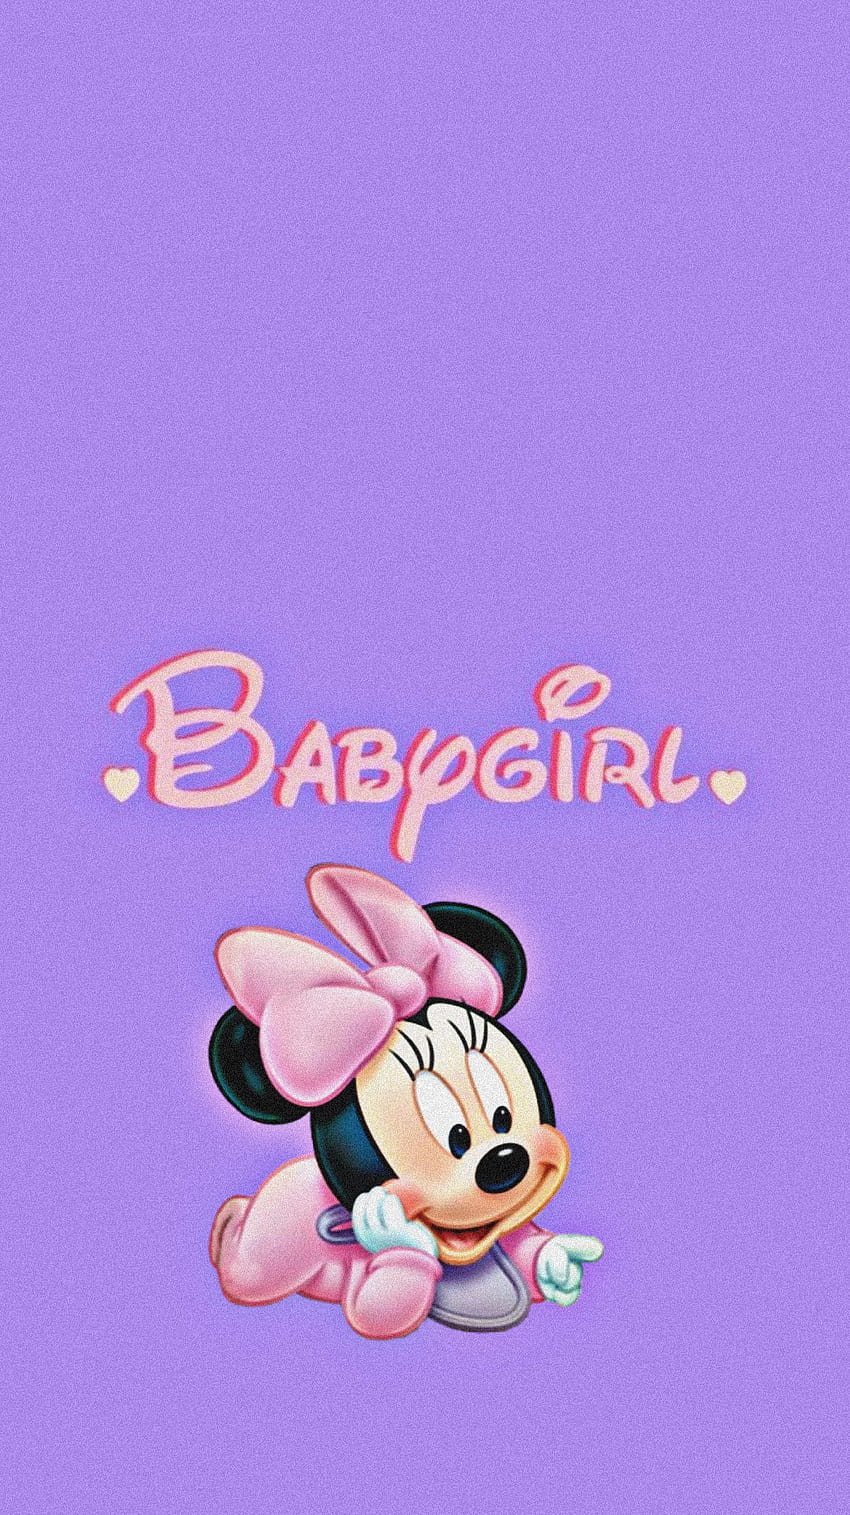 Baby Minnie Mouse wallpaper for iPhone and Android - Minnie Mouse